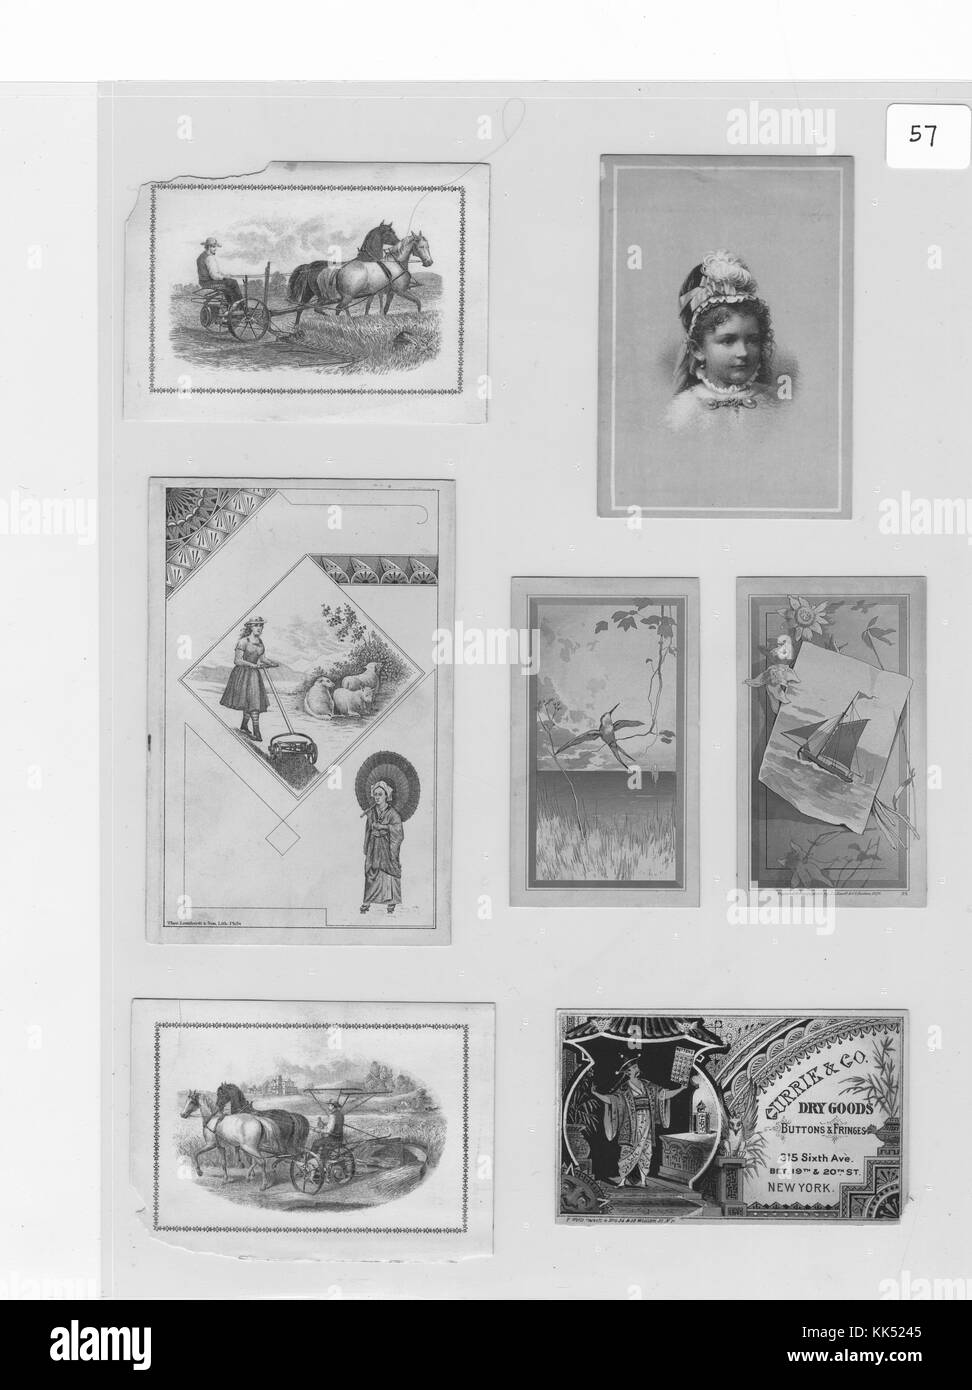 Collection of seven advertisement cards, from left to right, top row, card with a man on farm equipment being pulled by horses, for C Aultman and Company, manufacturers of the Buckeye Mower and Reaper, and a card with the portrait of a child for Scott's Shoe Emporium, middle row, a card depicting a woman mowing and a woman in a kimono, and two cards, one depicting a bird, the other a boat, both for Jacques and Marcus Jewelers, bottom row, card with a man on farm equipment being pulled by horses, and a card depicting a woman in a kimono for Currie and Company Dry Goods, Buttons and Fringes, all Stock Photo